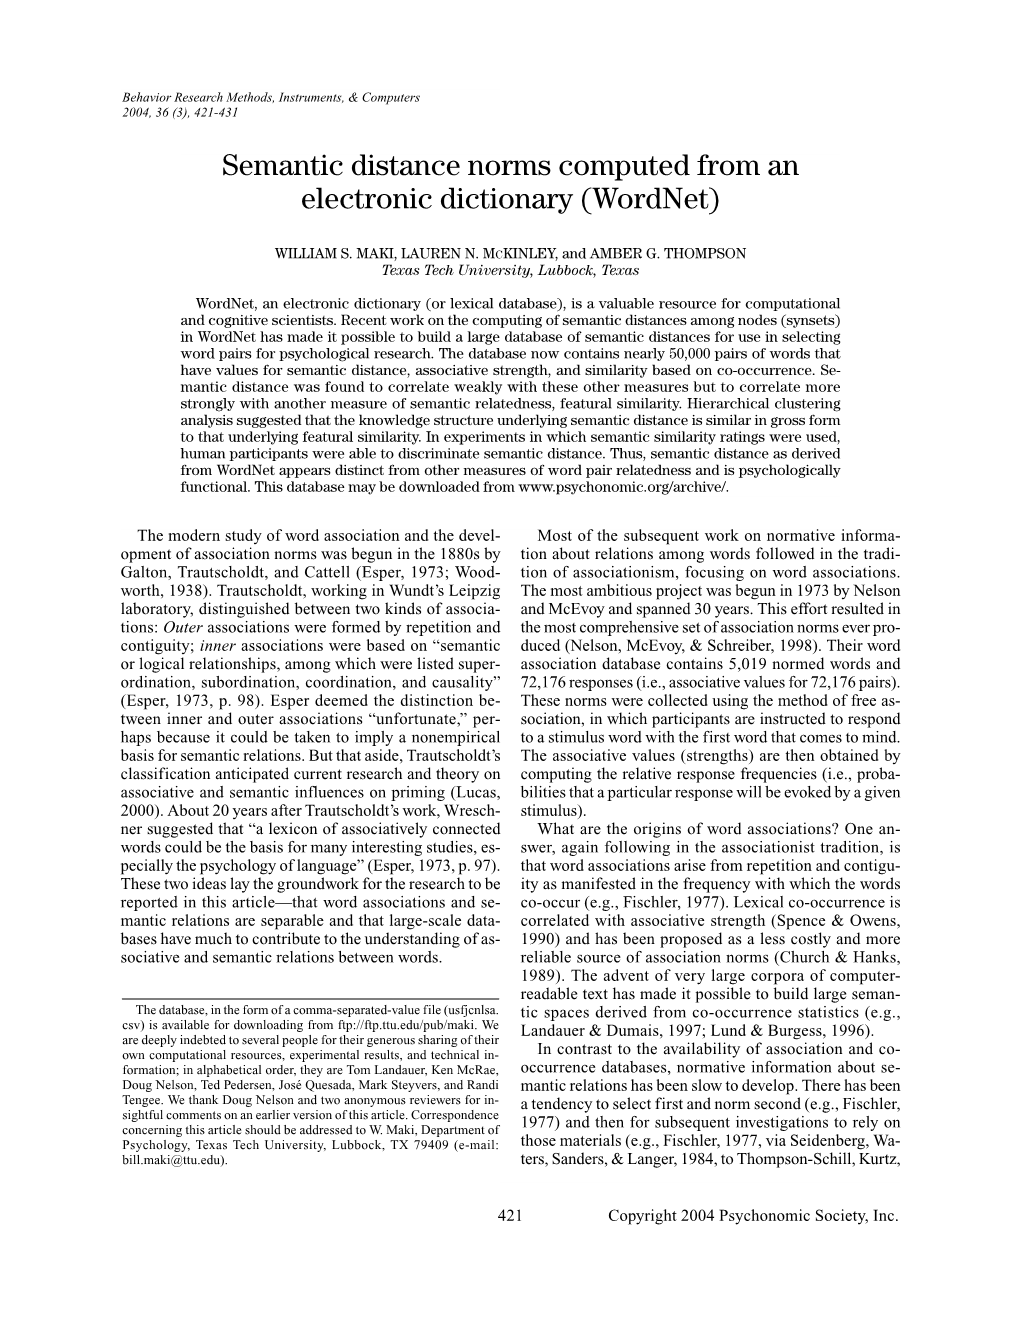 Semantic Distance Norms Computed from an Electronic Dictionary (Wordnet)